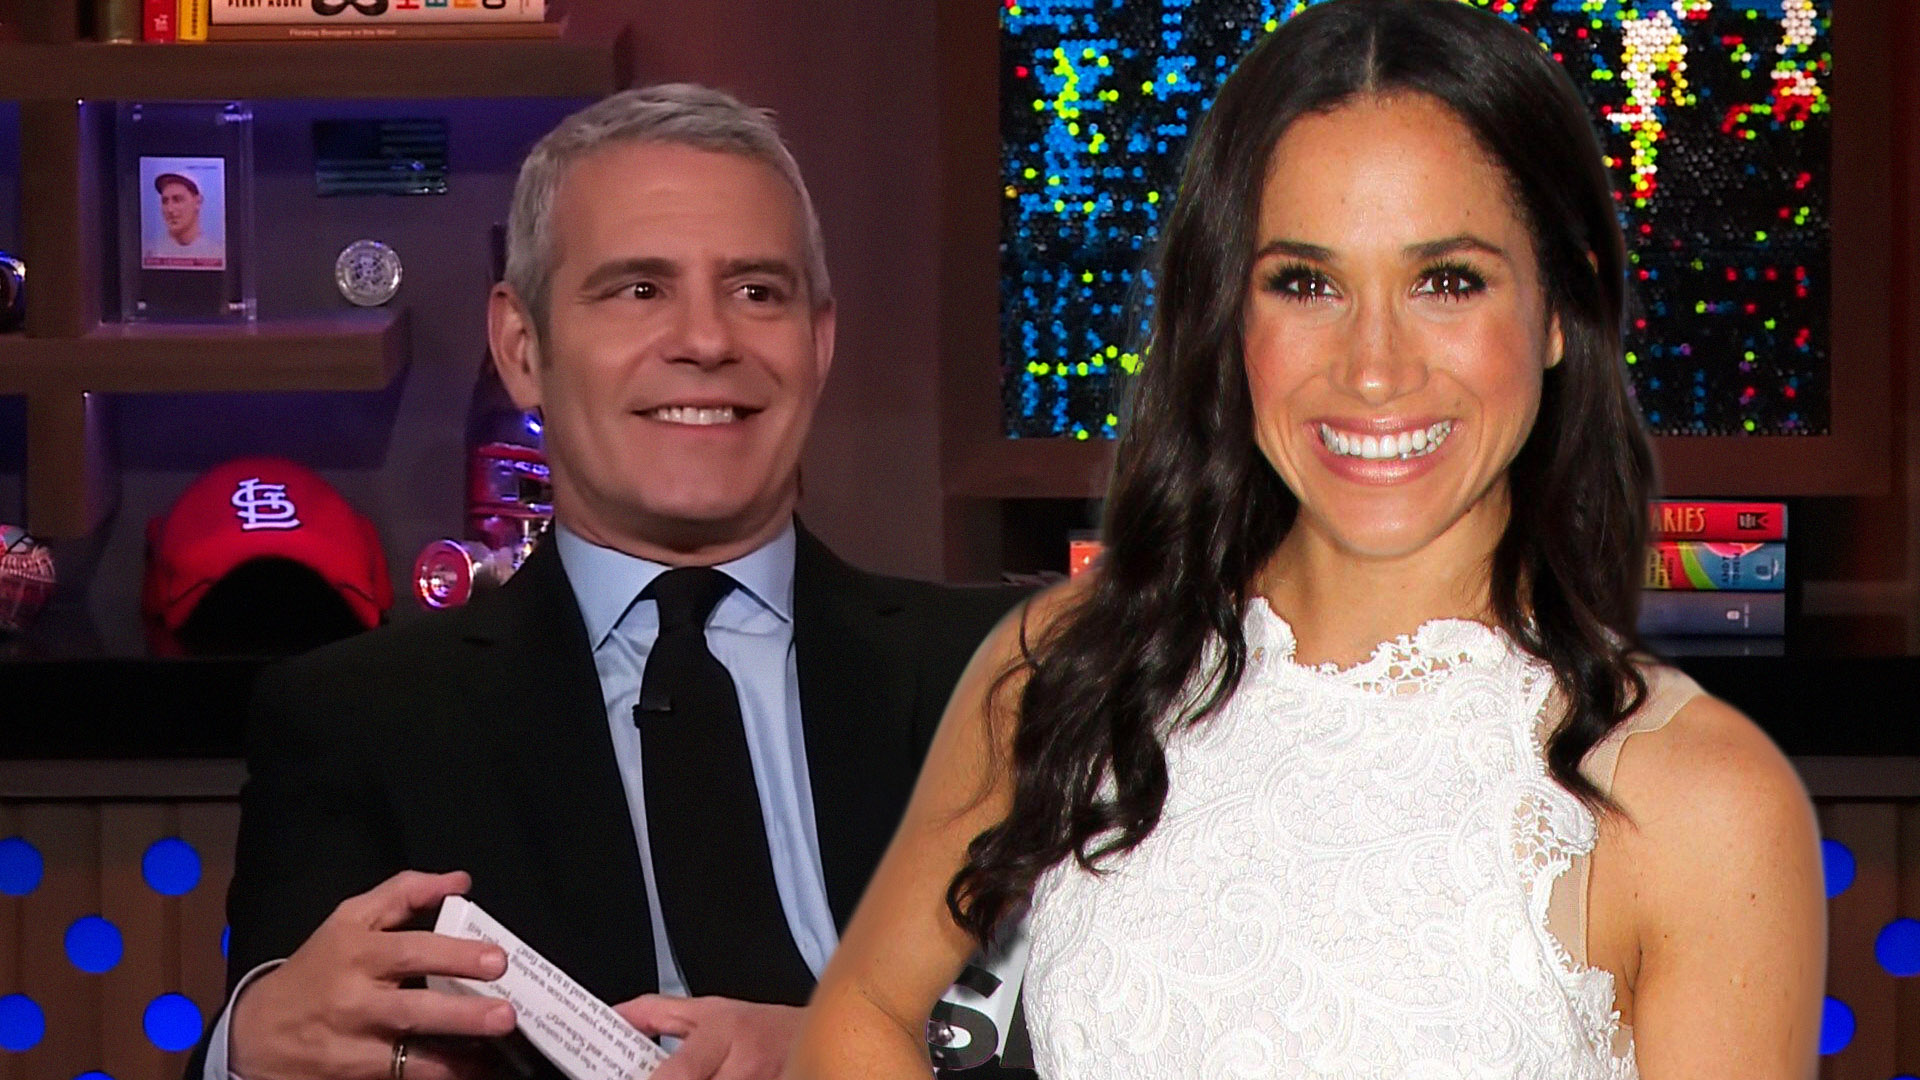 Andy Cohen Passed On Meghan Markle as a Watch What Happens Live Guest